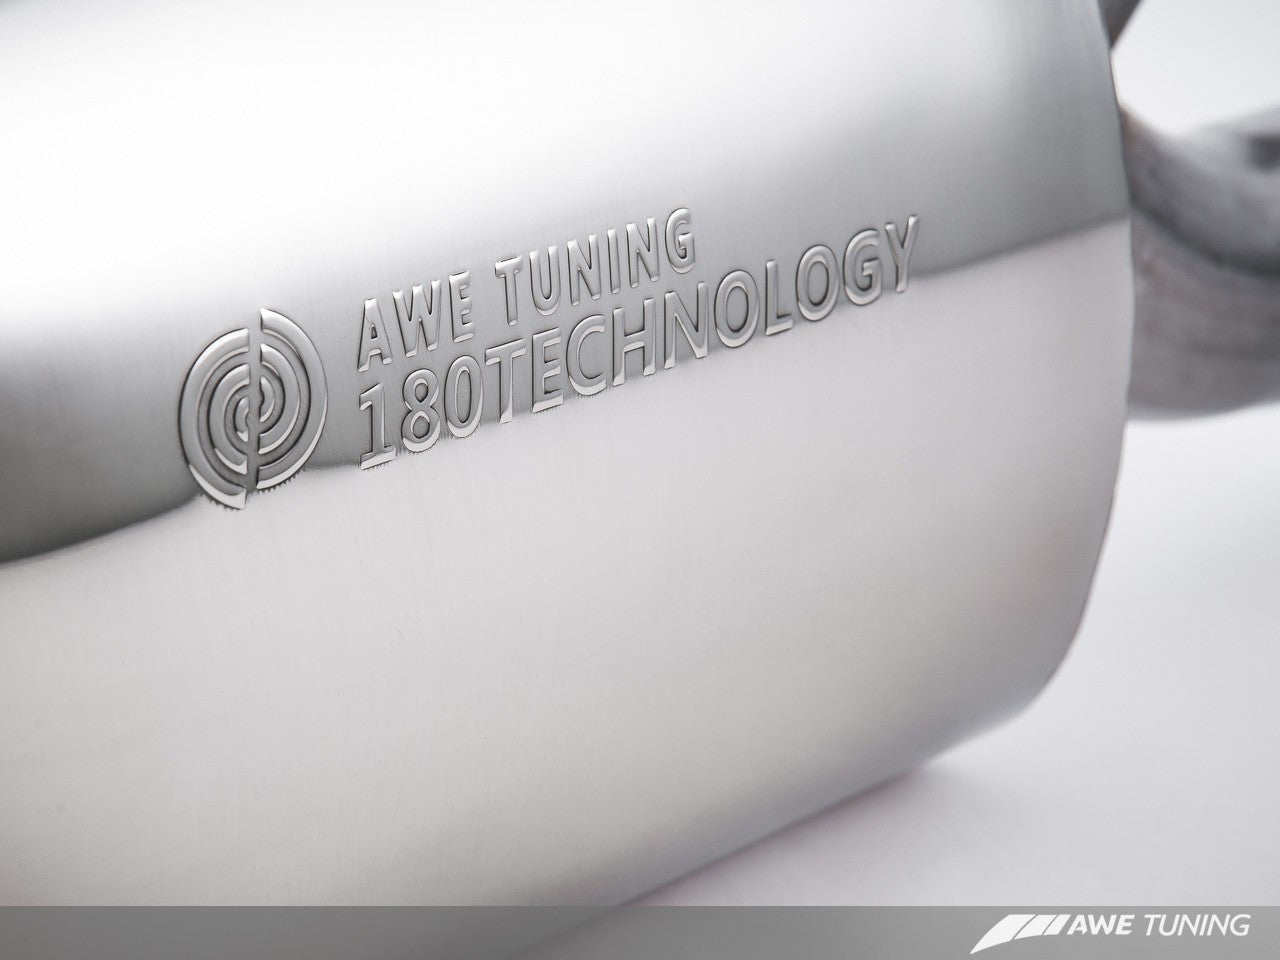 AWE Touring Edition Exhaust for B8 A5 2.0T - Motorsports LA